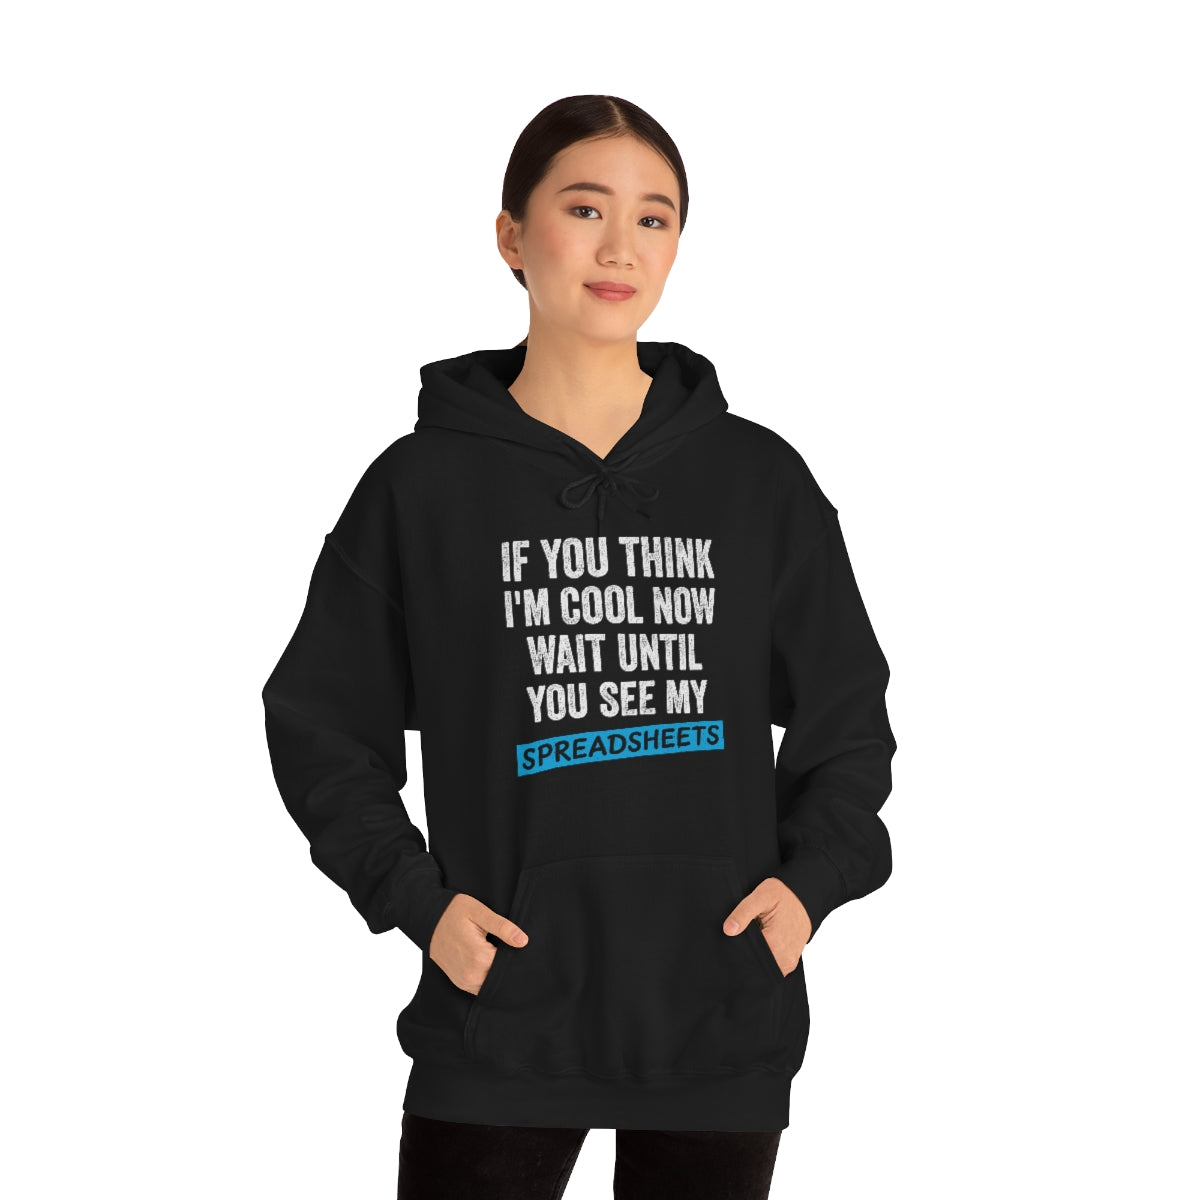 Unisex Funny Jersey Short Sleeve Hoodie | Accountants Humorous Hooded Sweater | Comfortable Easy To Wear Jumper With Hood